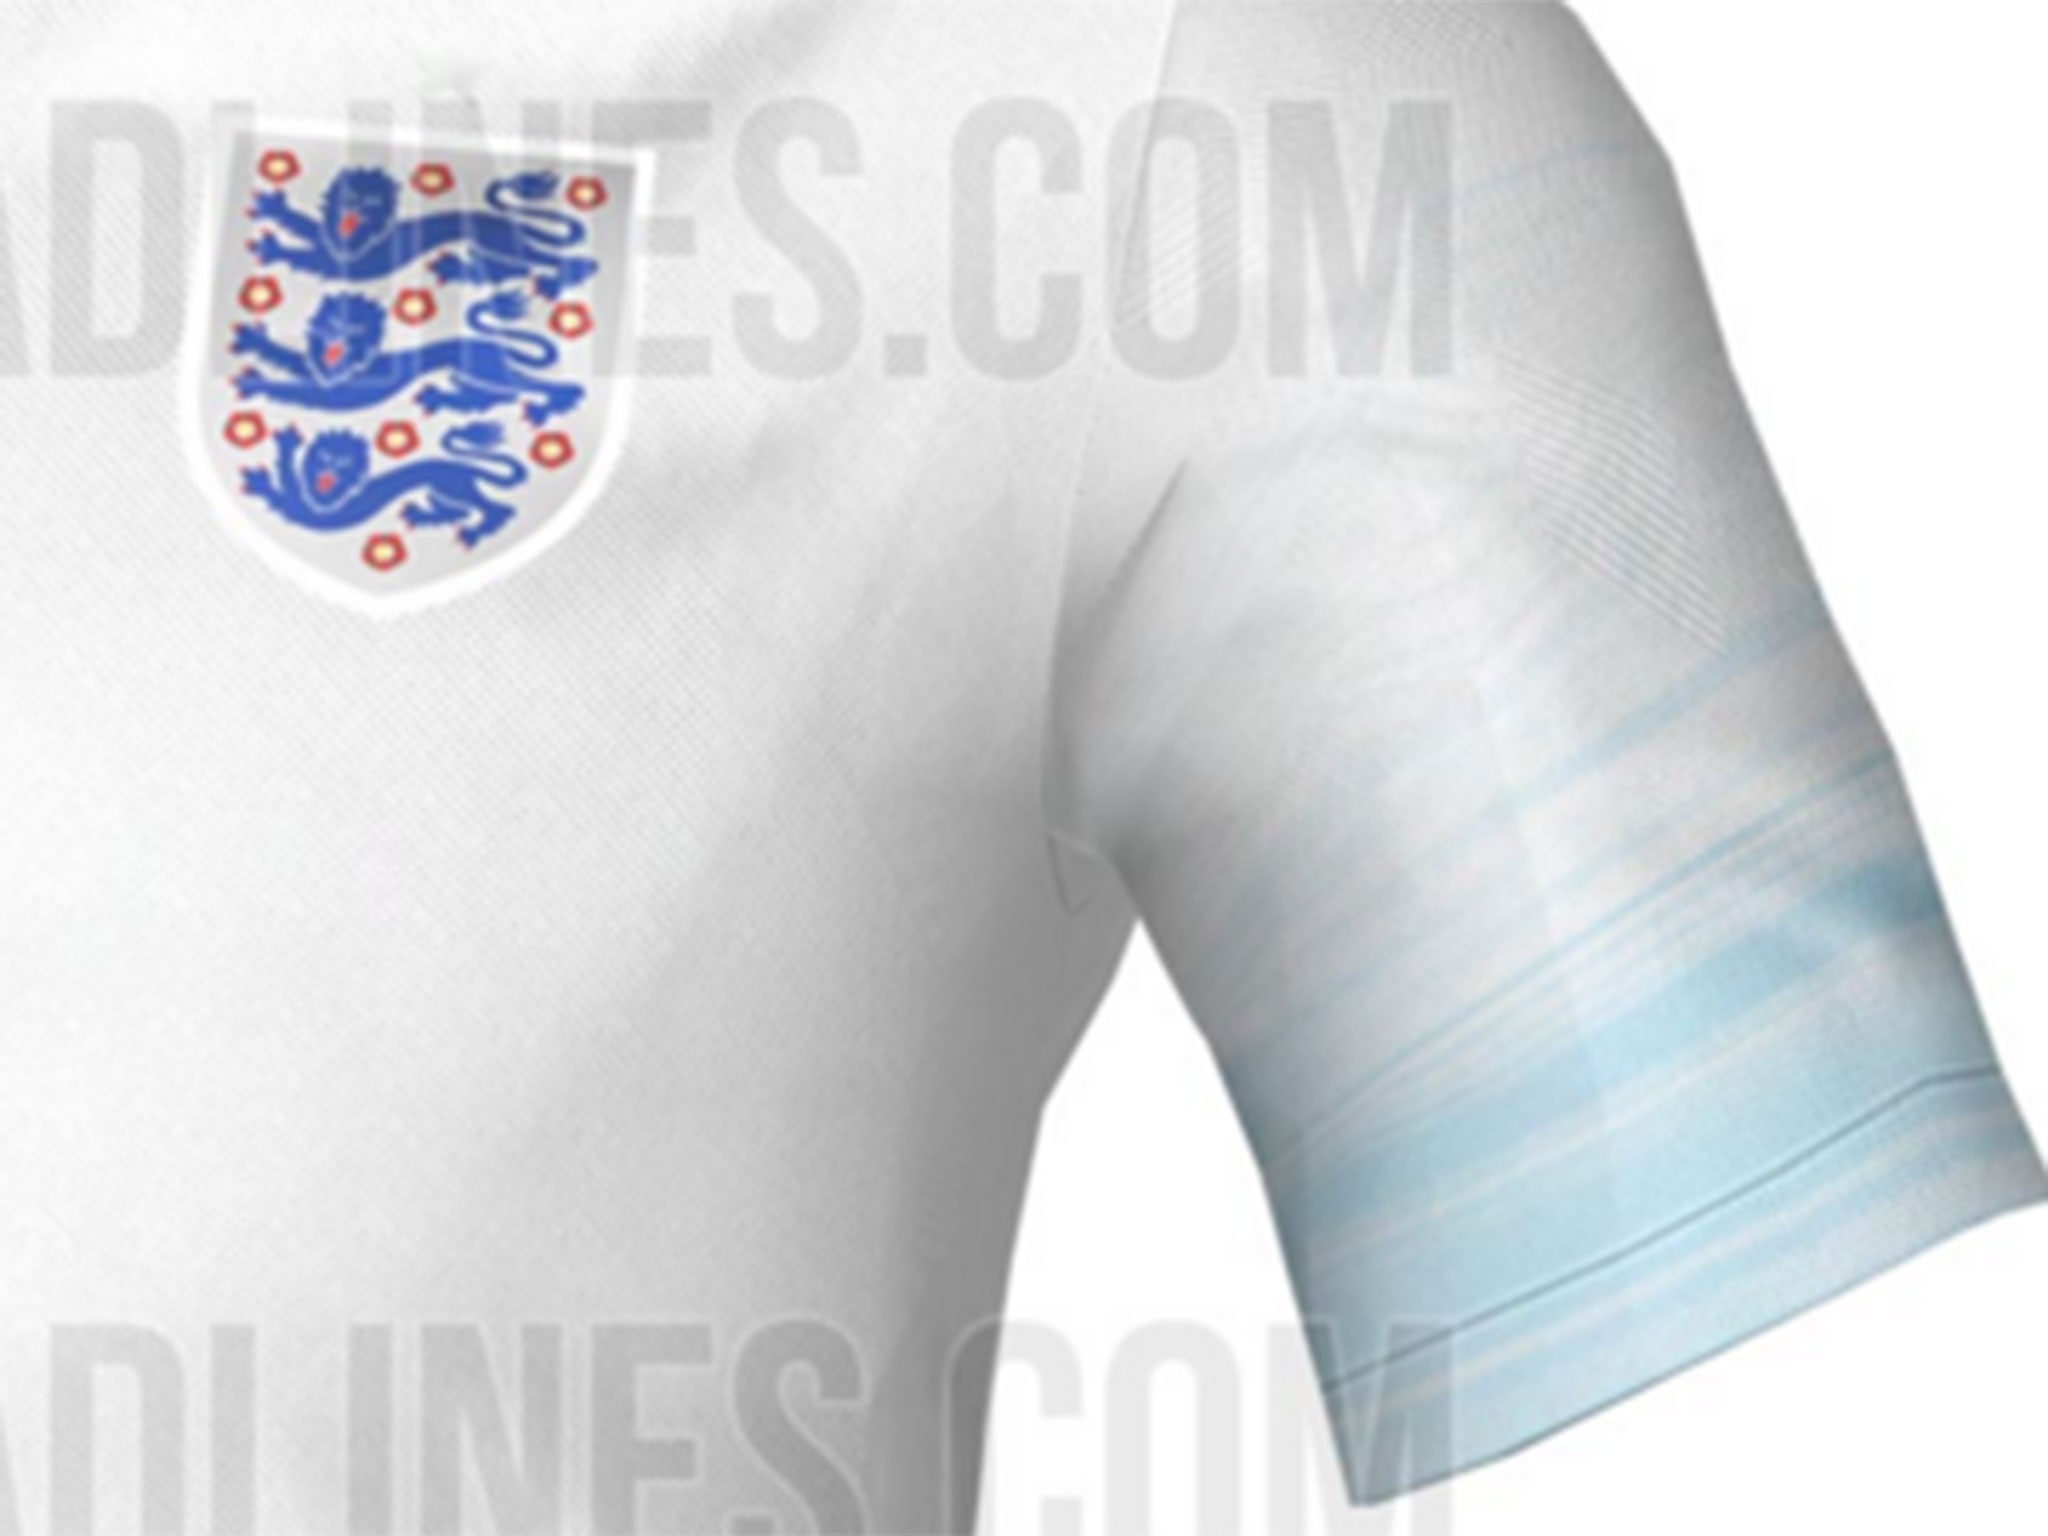 A shot of the 'leaked' England kit